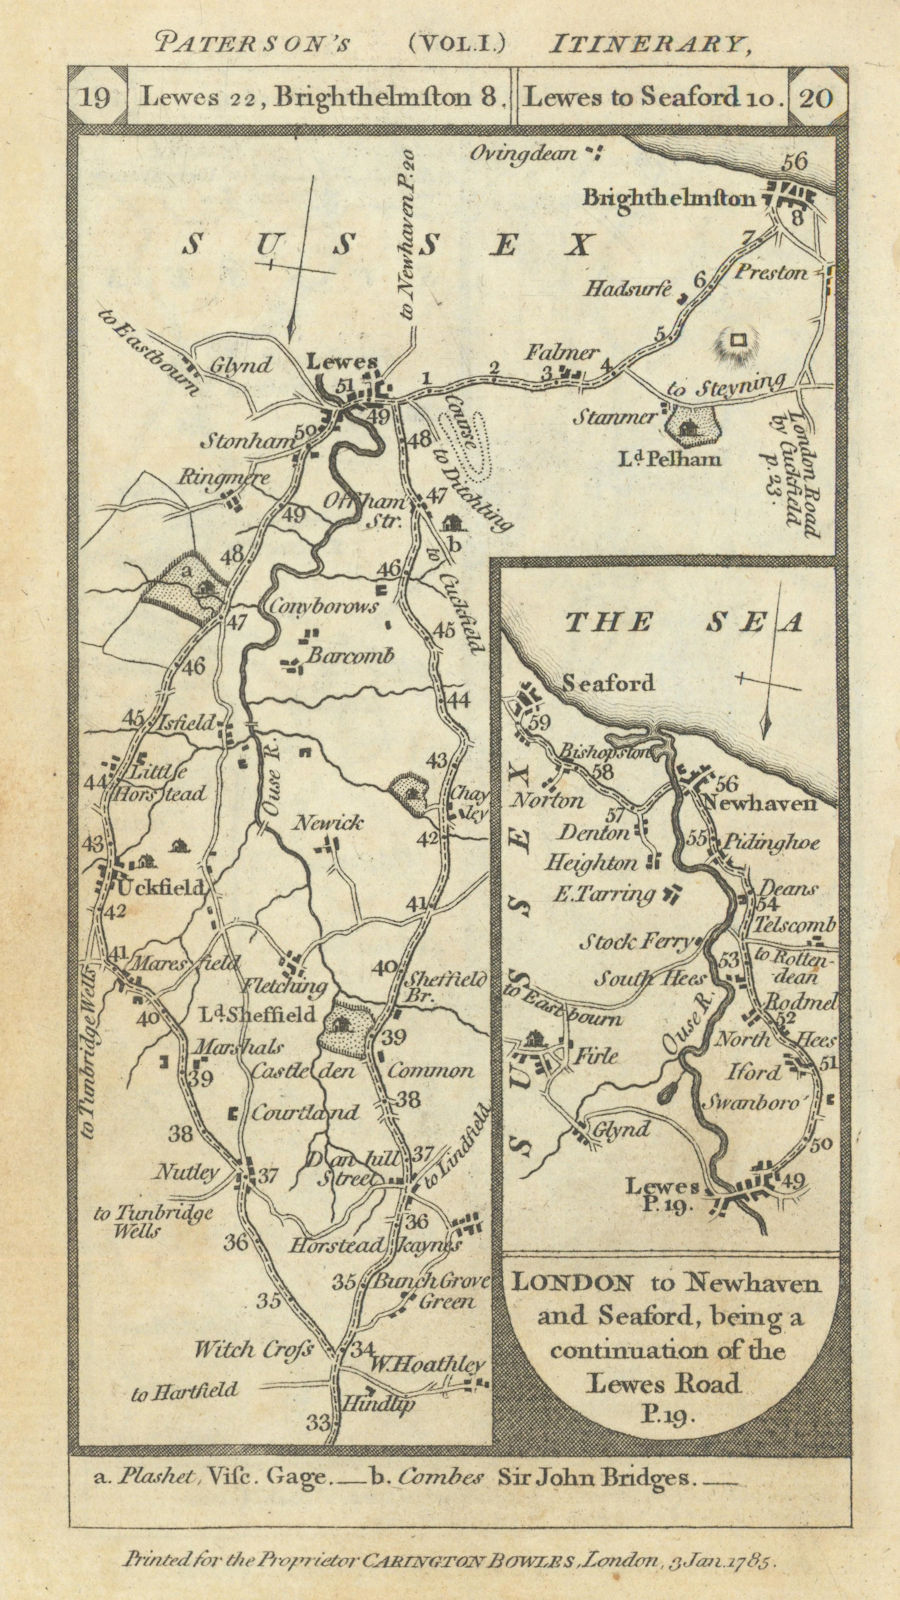 Associate Product Uckfield-Lewes-Brighton-Newhaven-Seaford road strip map PATERSON 1785 old